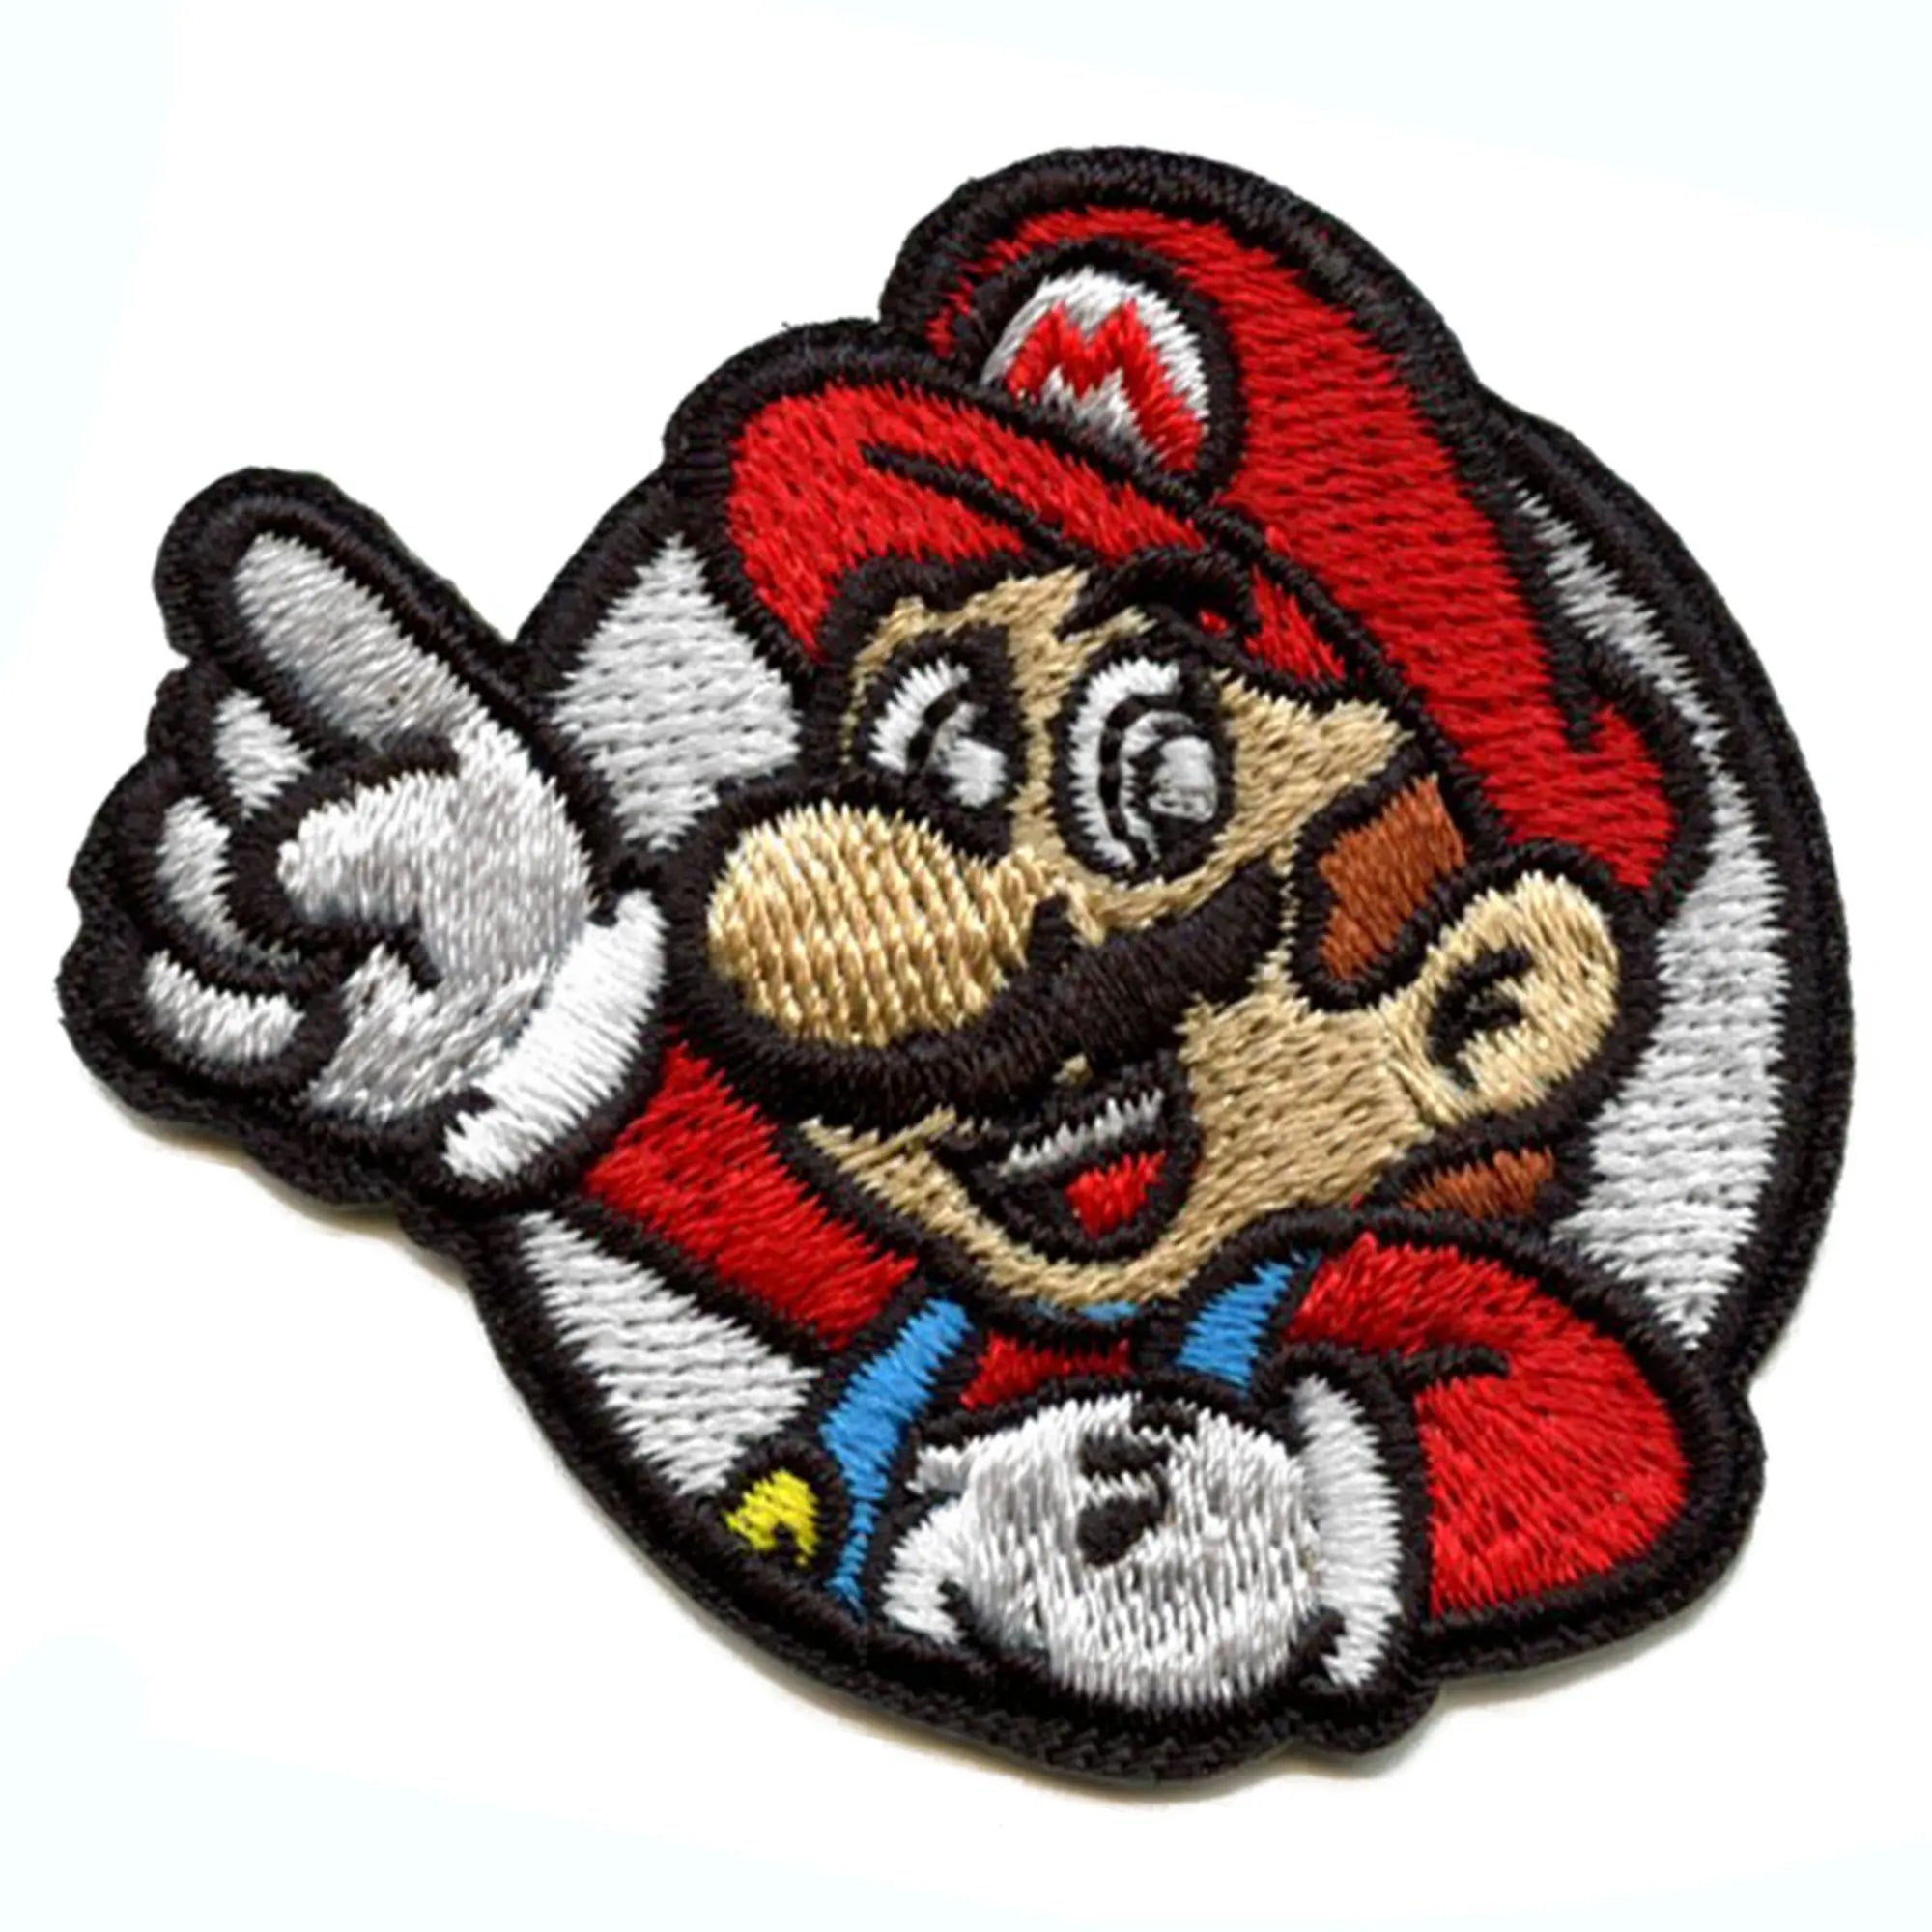 Shper mario iron on patch (Shipping Only) for Sale in Baldwin Park